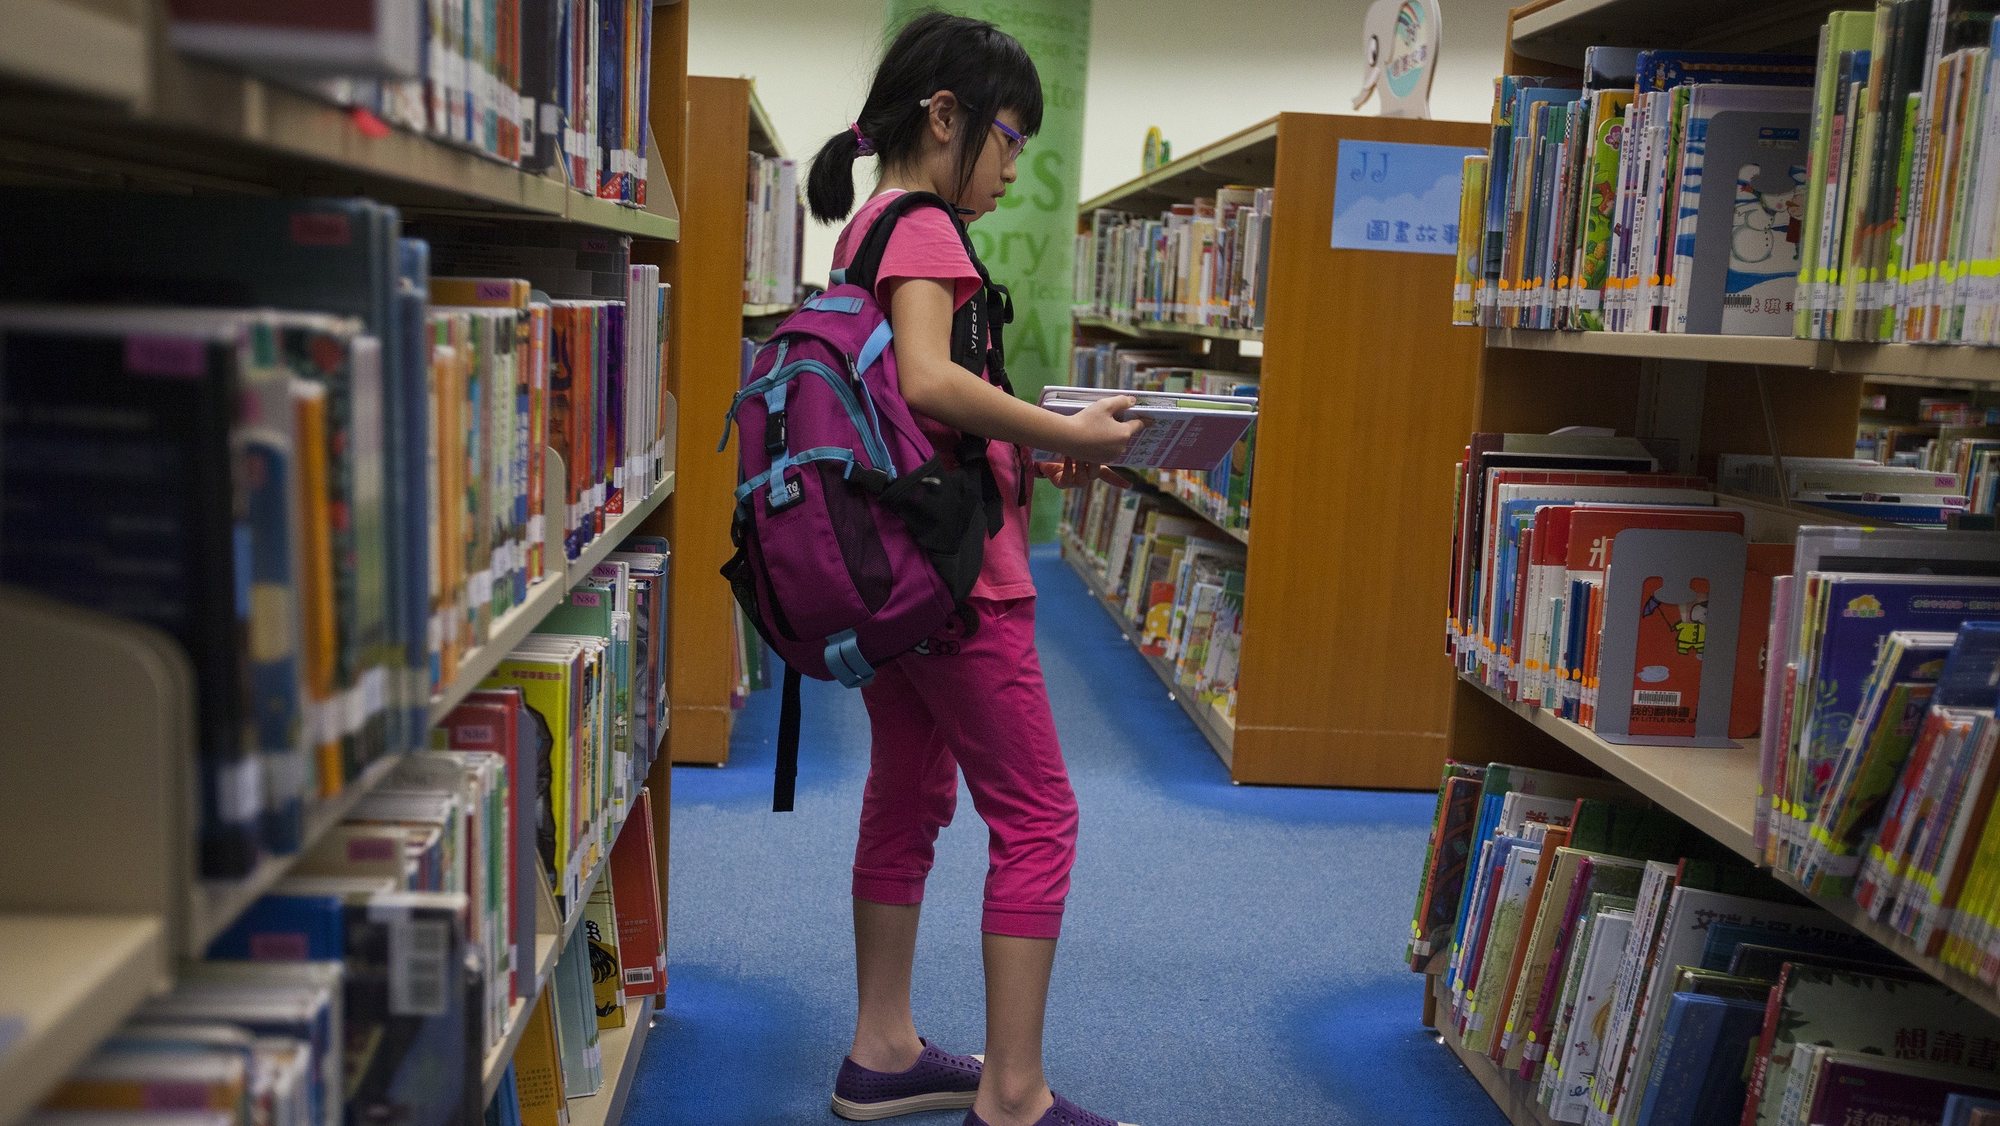 epa06826586 A child browses books at a public library in Tseung Kwan O, Sai Kung District, New Territories, Hong Kong, 21 June 2018. The Hong Kong government has come under fire from gay rights activists in the city for removing from the shelves of all of its public libraries ten LGBTQ (Lesbian, Gay, Bisexual, Trans, Queer/Questioning) themed books for children, allegedly under pressure from Christian fundamentalist anti-gay rights groups. Due to a sudden surge in demand for the ten controversial books, none are available for borrowing from the &#039;closed stack&#039; sections of Hong Kong libraries until 2019 at the earliest. &#039;Closed stacks&#039; are storage sections in public libraries where library staff place books out of sight whilst off the shelves, but can these books can be retrieved by members of the public on demand.  EPA/ALEX HOFFORD